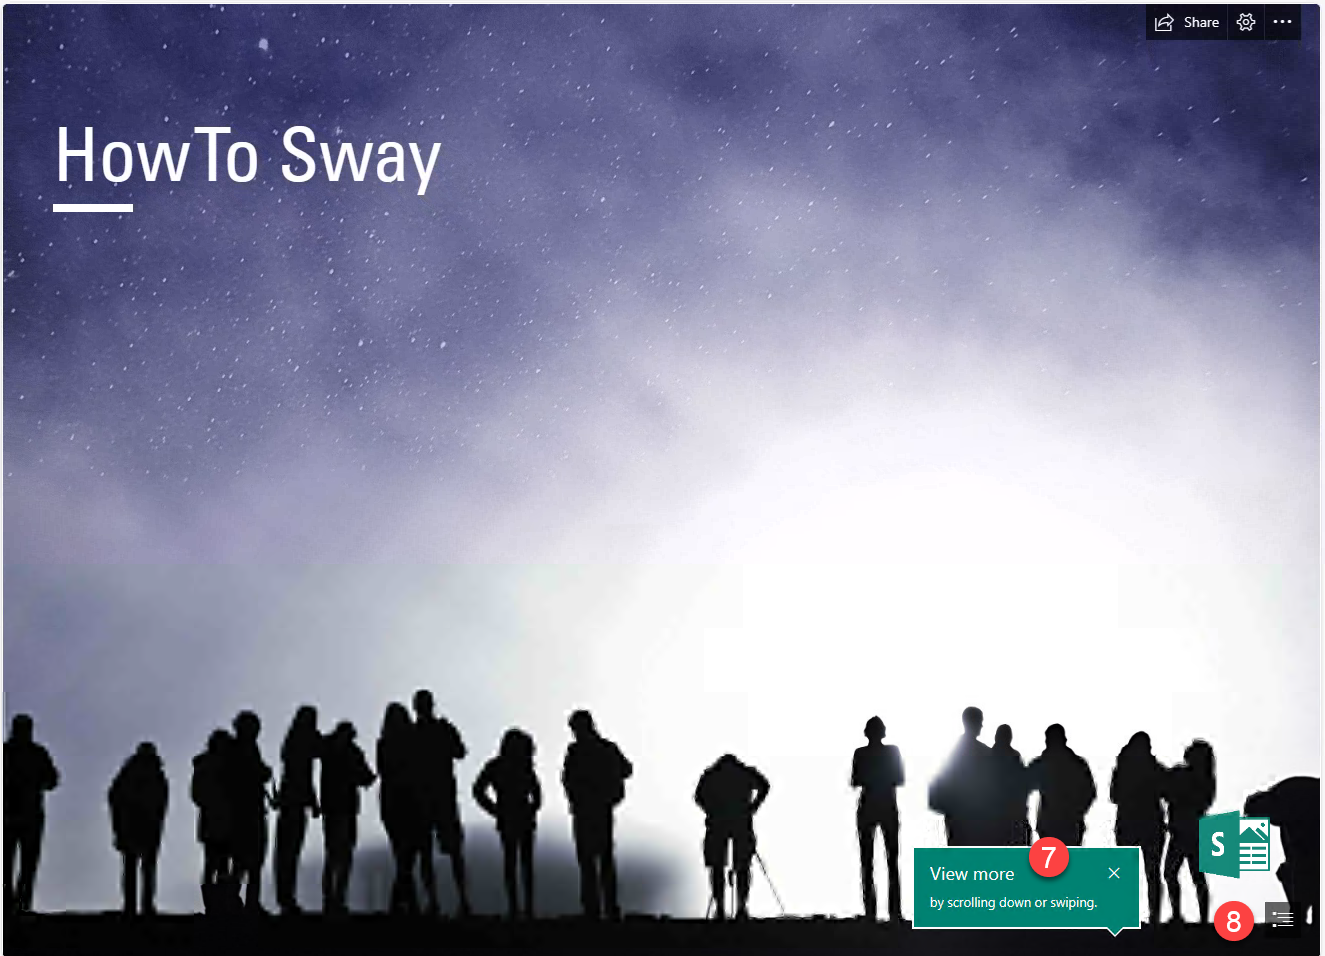 Screenshot of the home page of the How to Sway example featuring the silhouette of a crowd against a starry sky. Number 7 is on a tooltip for Viewing more, and number 8 is on a list representing a table of contents.  